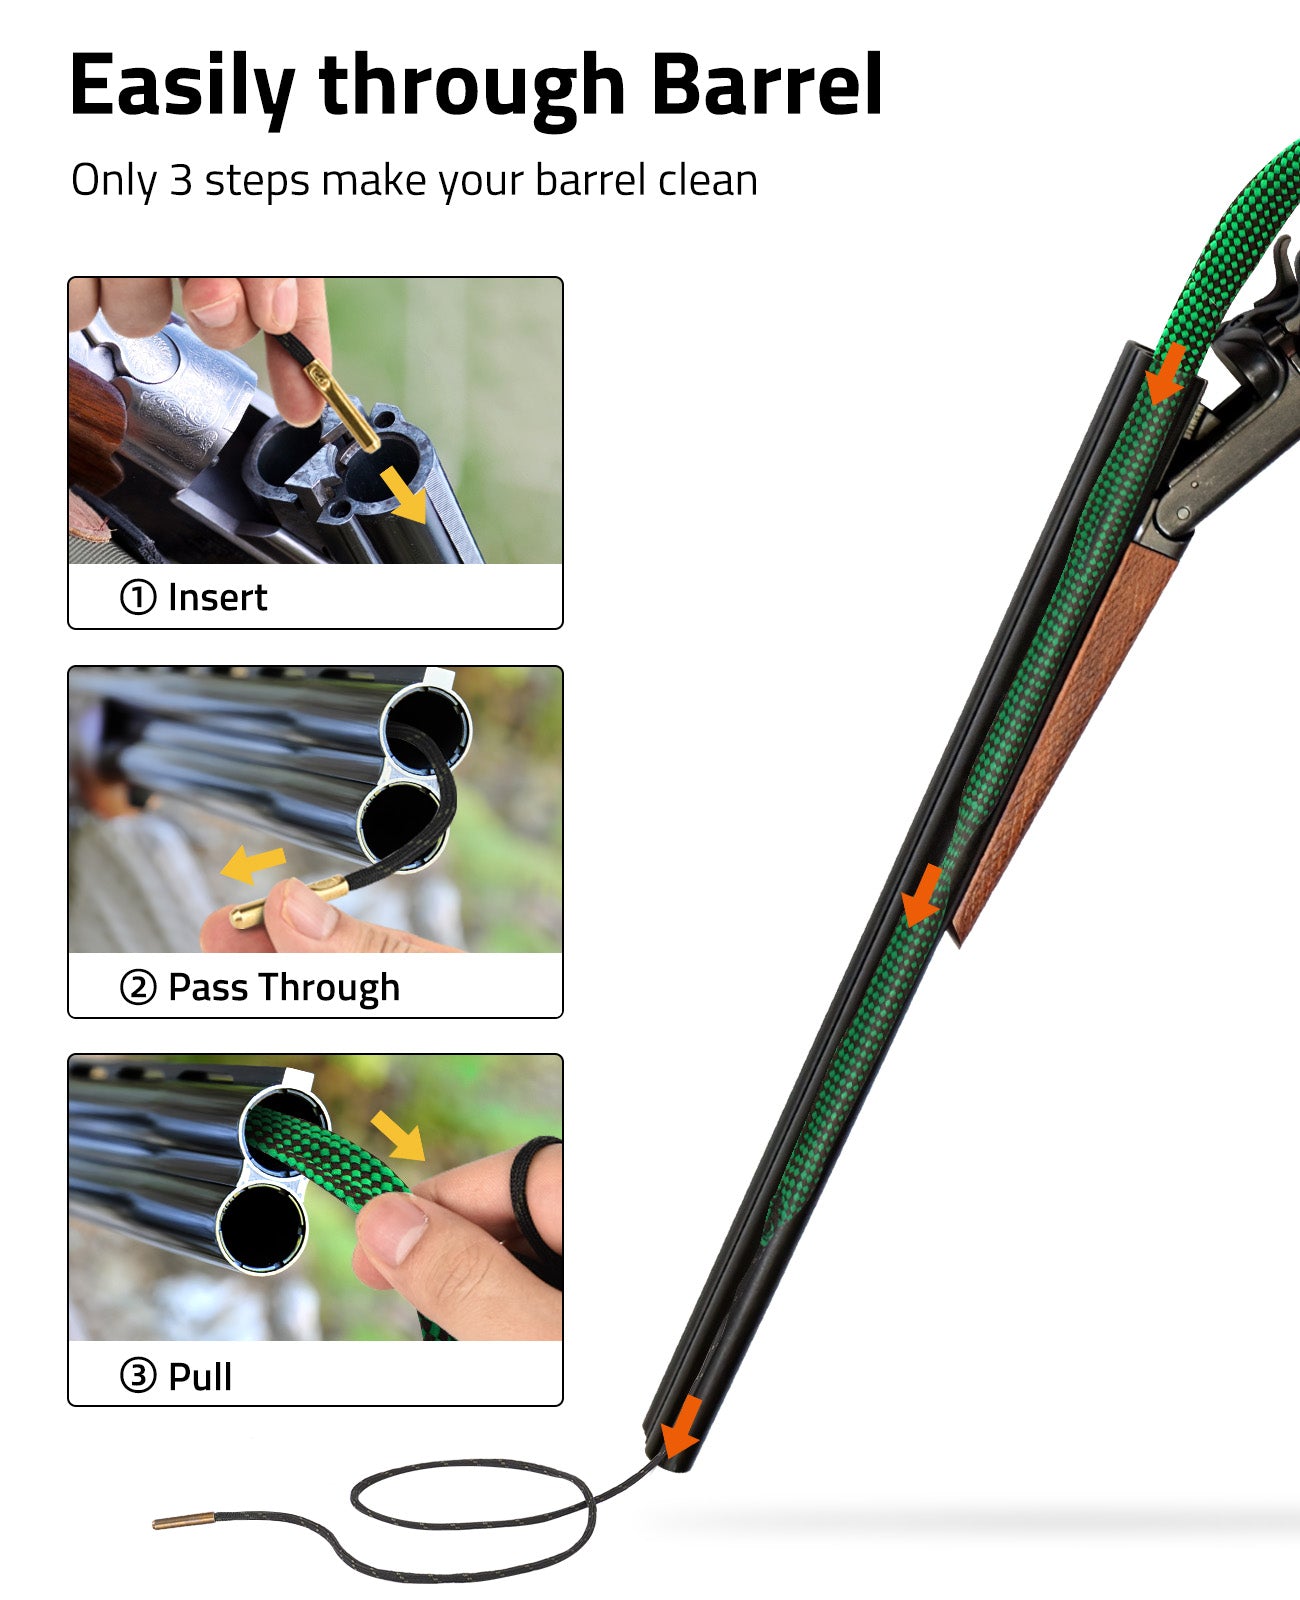 3 Steps to Clean the Barrel with EZshoot Bore Cleaner